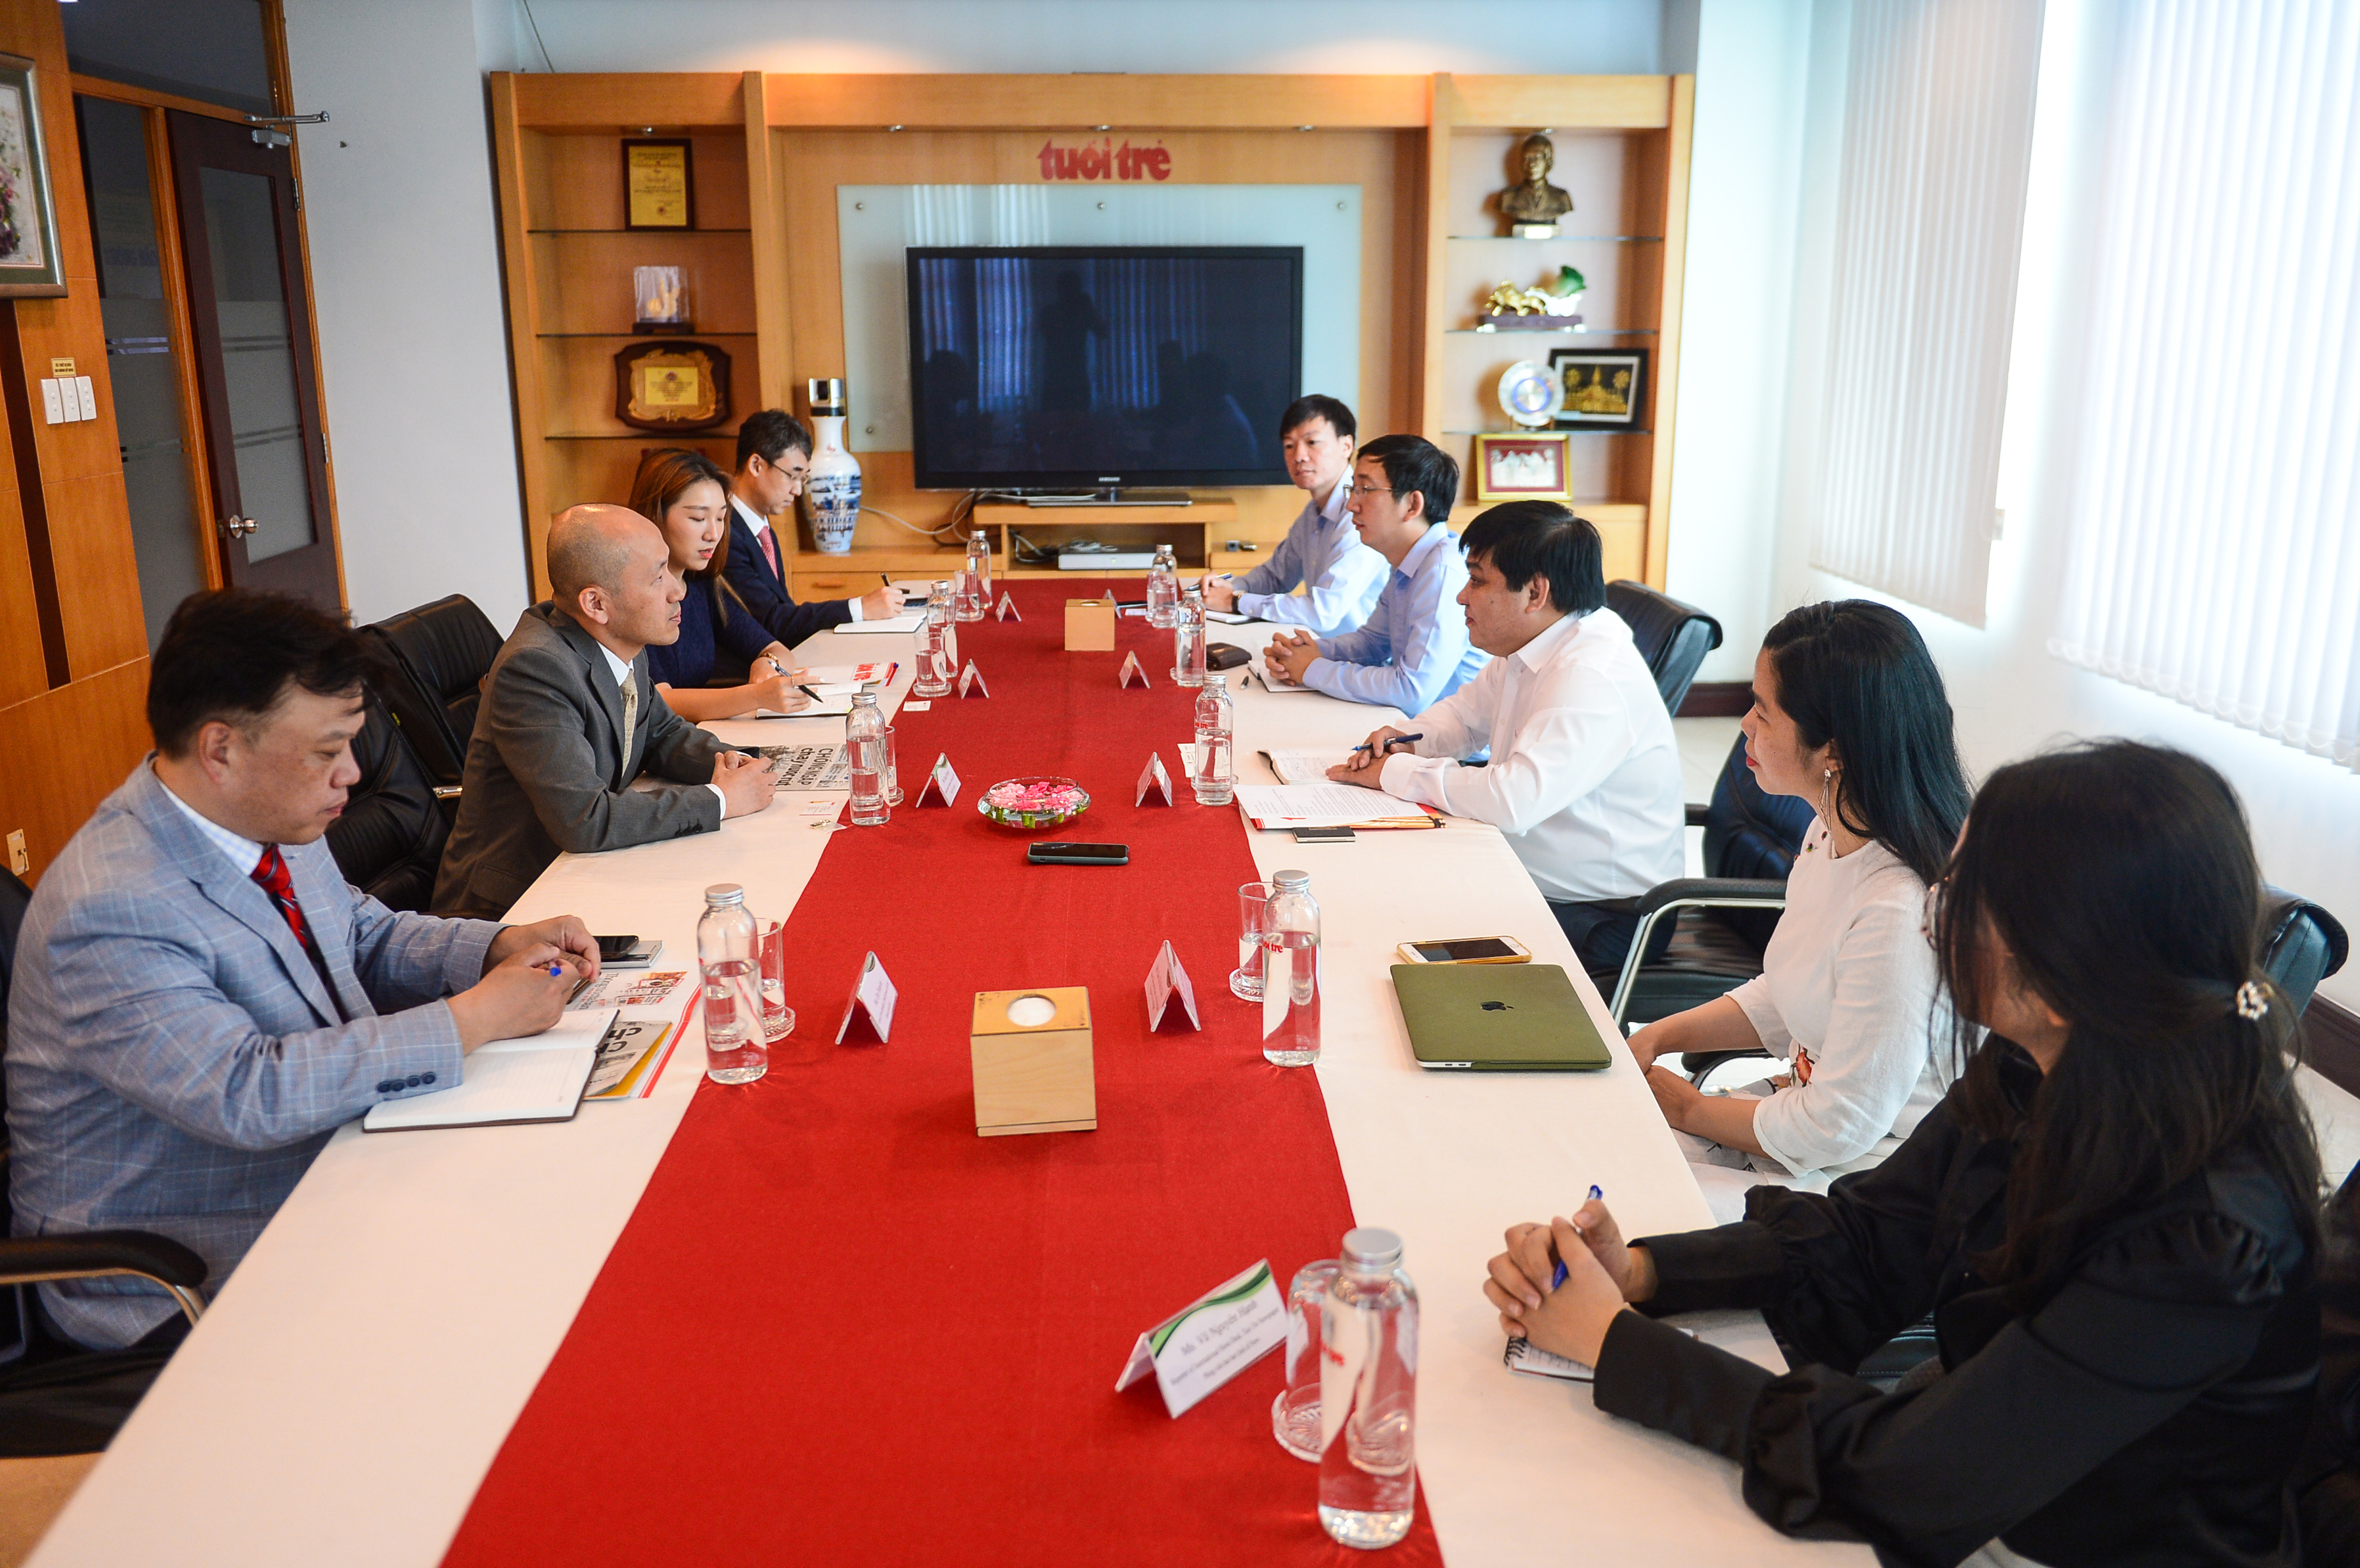 The delegation of South Korean Consulate in Ho Chi Minh City visits and works with Tuoi Tre newspaper April 15, 2021. Photo: Quang Dinh / Tuoi Tre